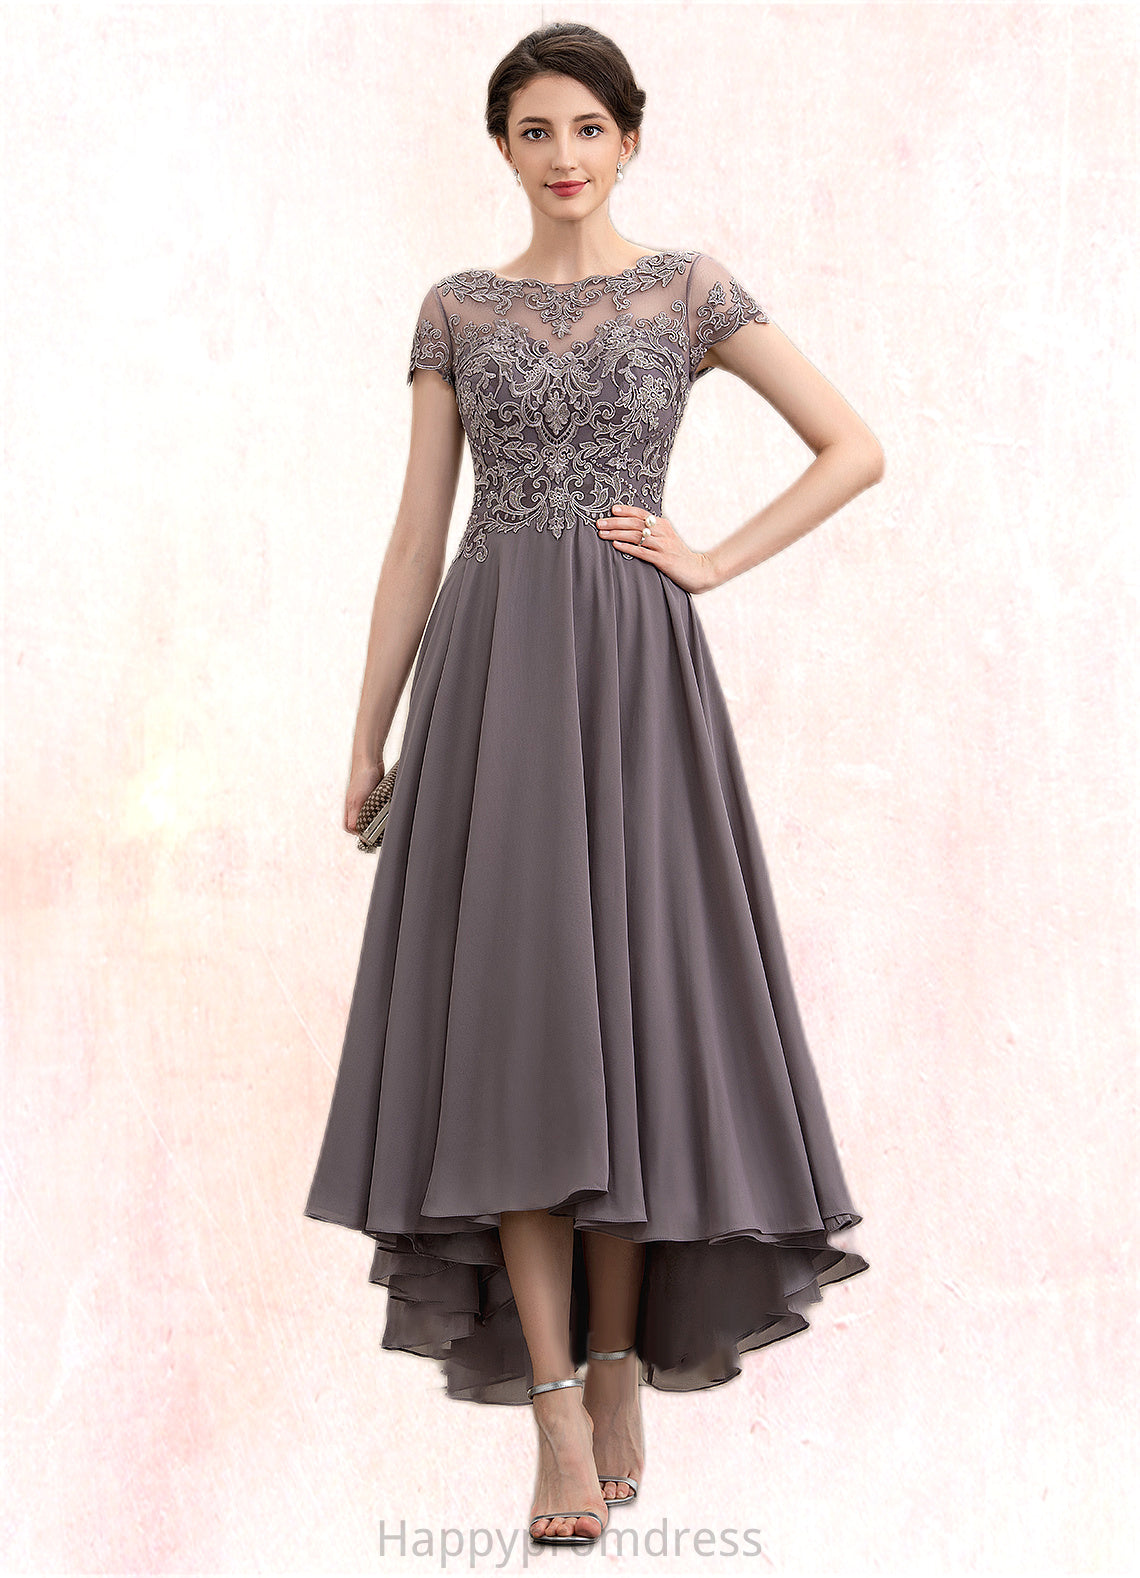 Kennedy A-Line Scoop Neck Asymmetrical Chiffon Lace Mother of the Bride Dress With Beading Sequins XXS126P0014599